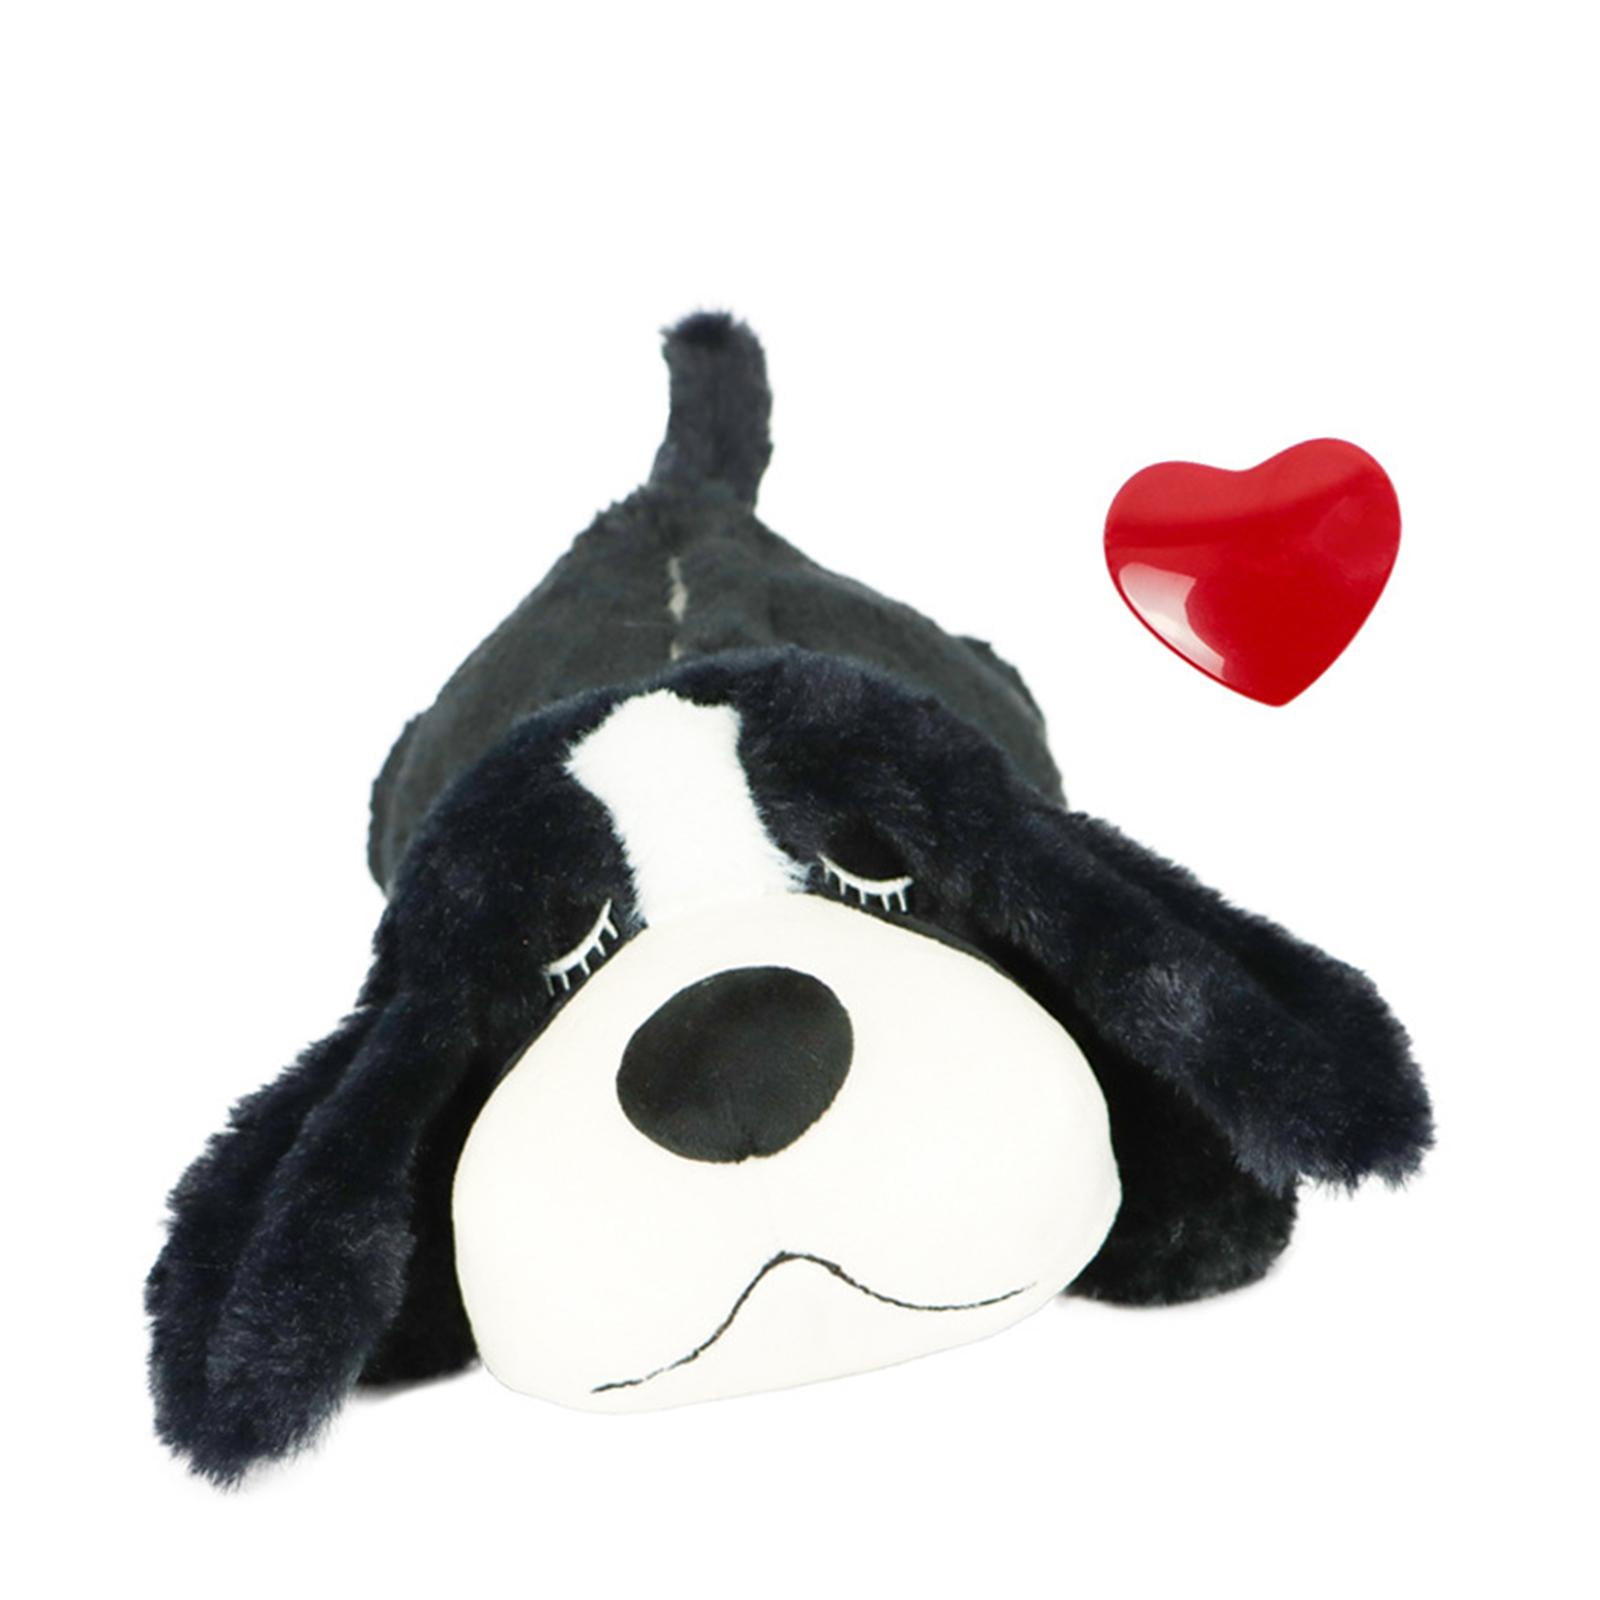 Puppy Heartbeat Toy, Dog Stuffed Toy Calming Behavioral, Heart Beat Plush  Toys for Puppy Dogs Cuddle 